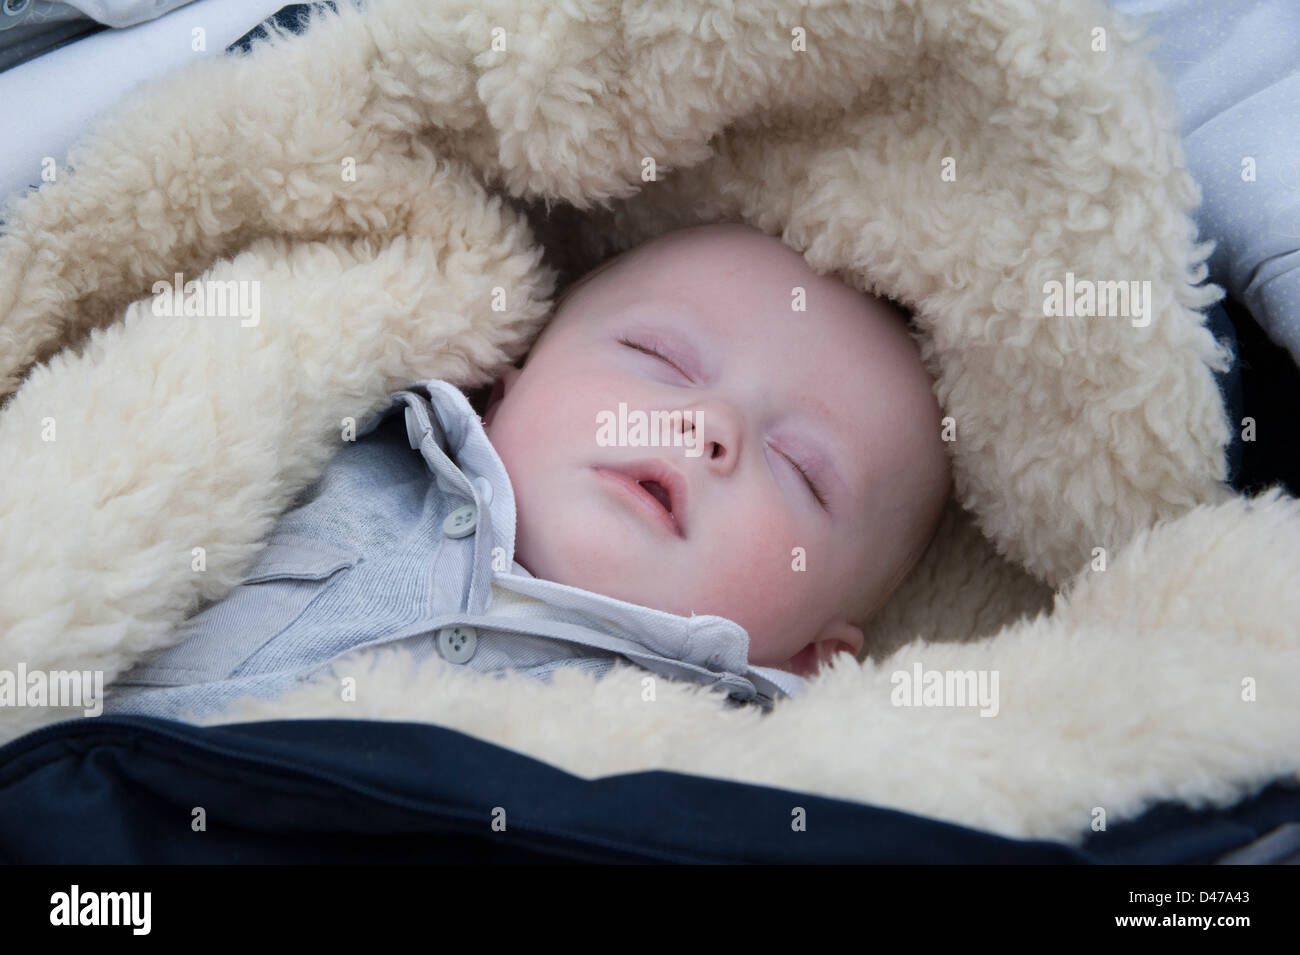 Six month old baby boy sleeping in his pram with a warm lambswool blanket Stock Photo